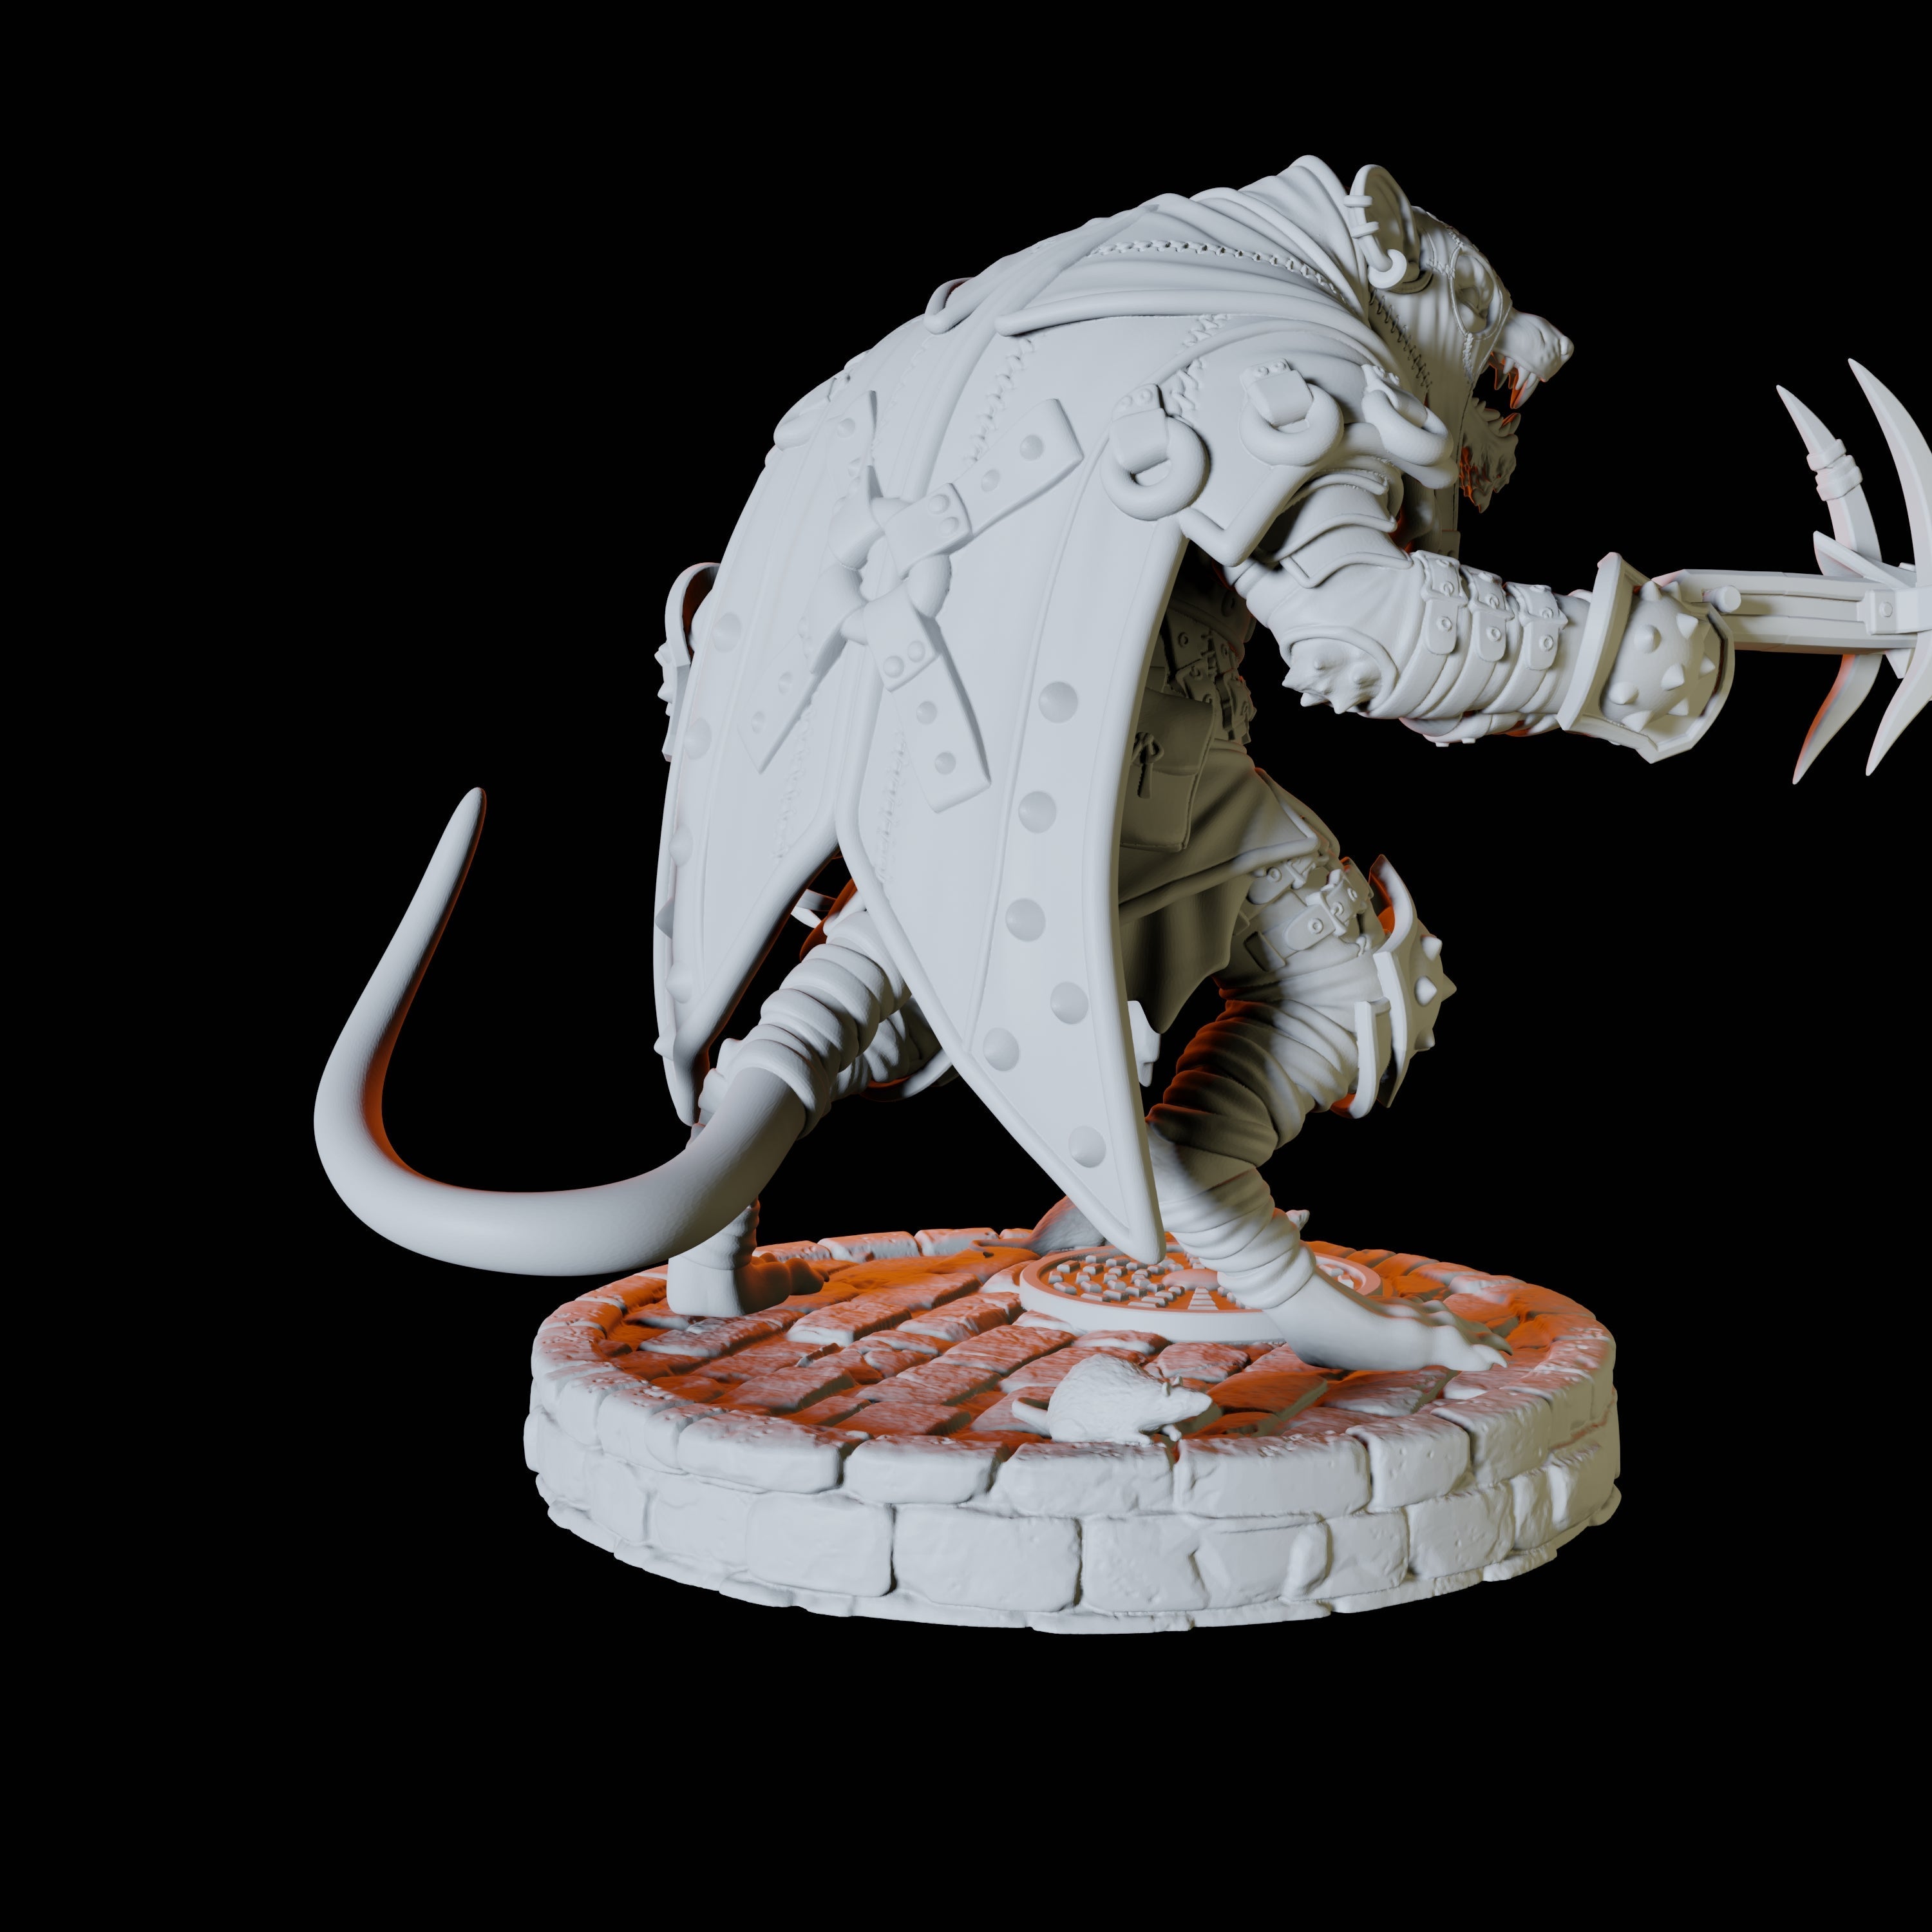 Five Ratfolk Assassins Miniature for Dungeons and Dragons, Pathfinder or other TTRPGs